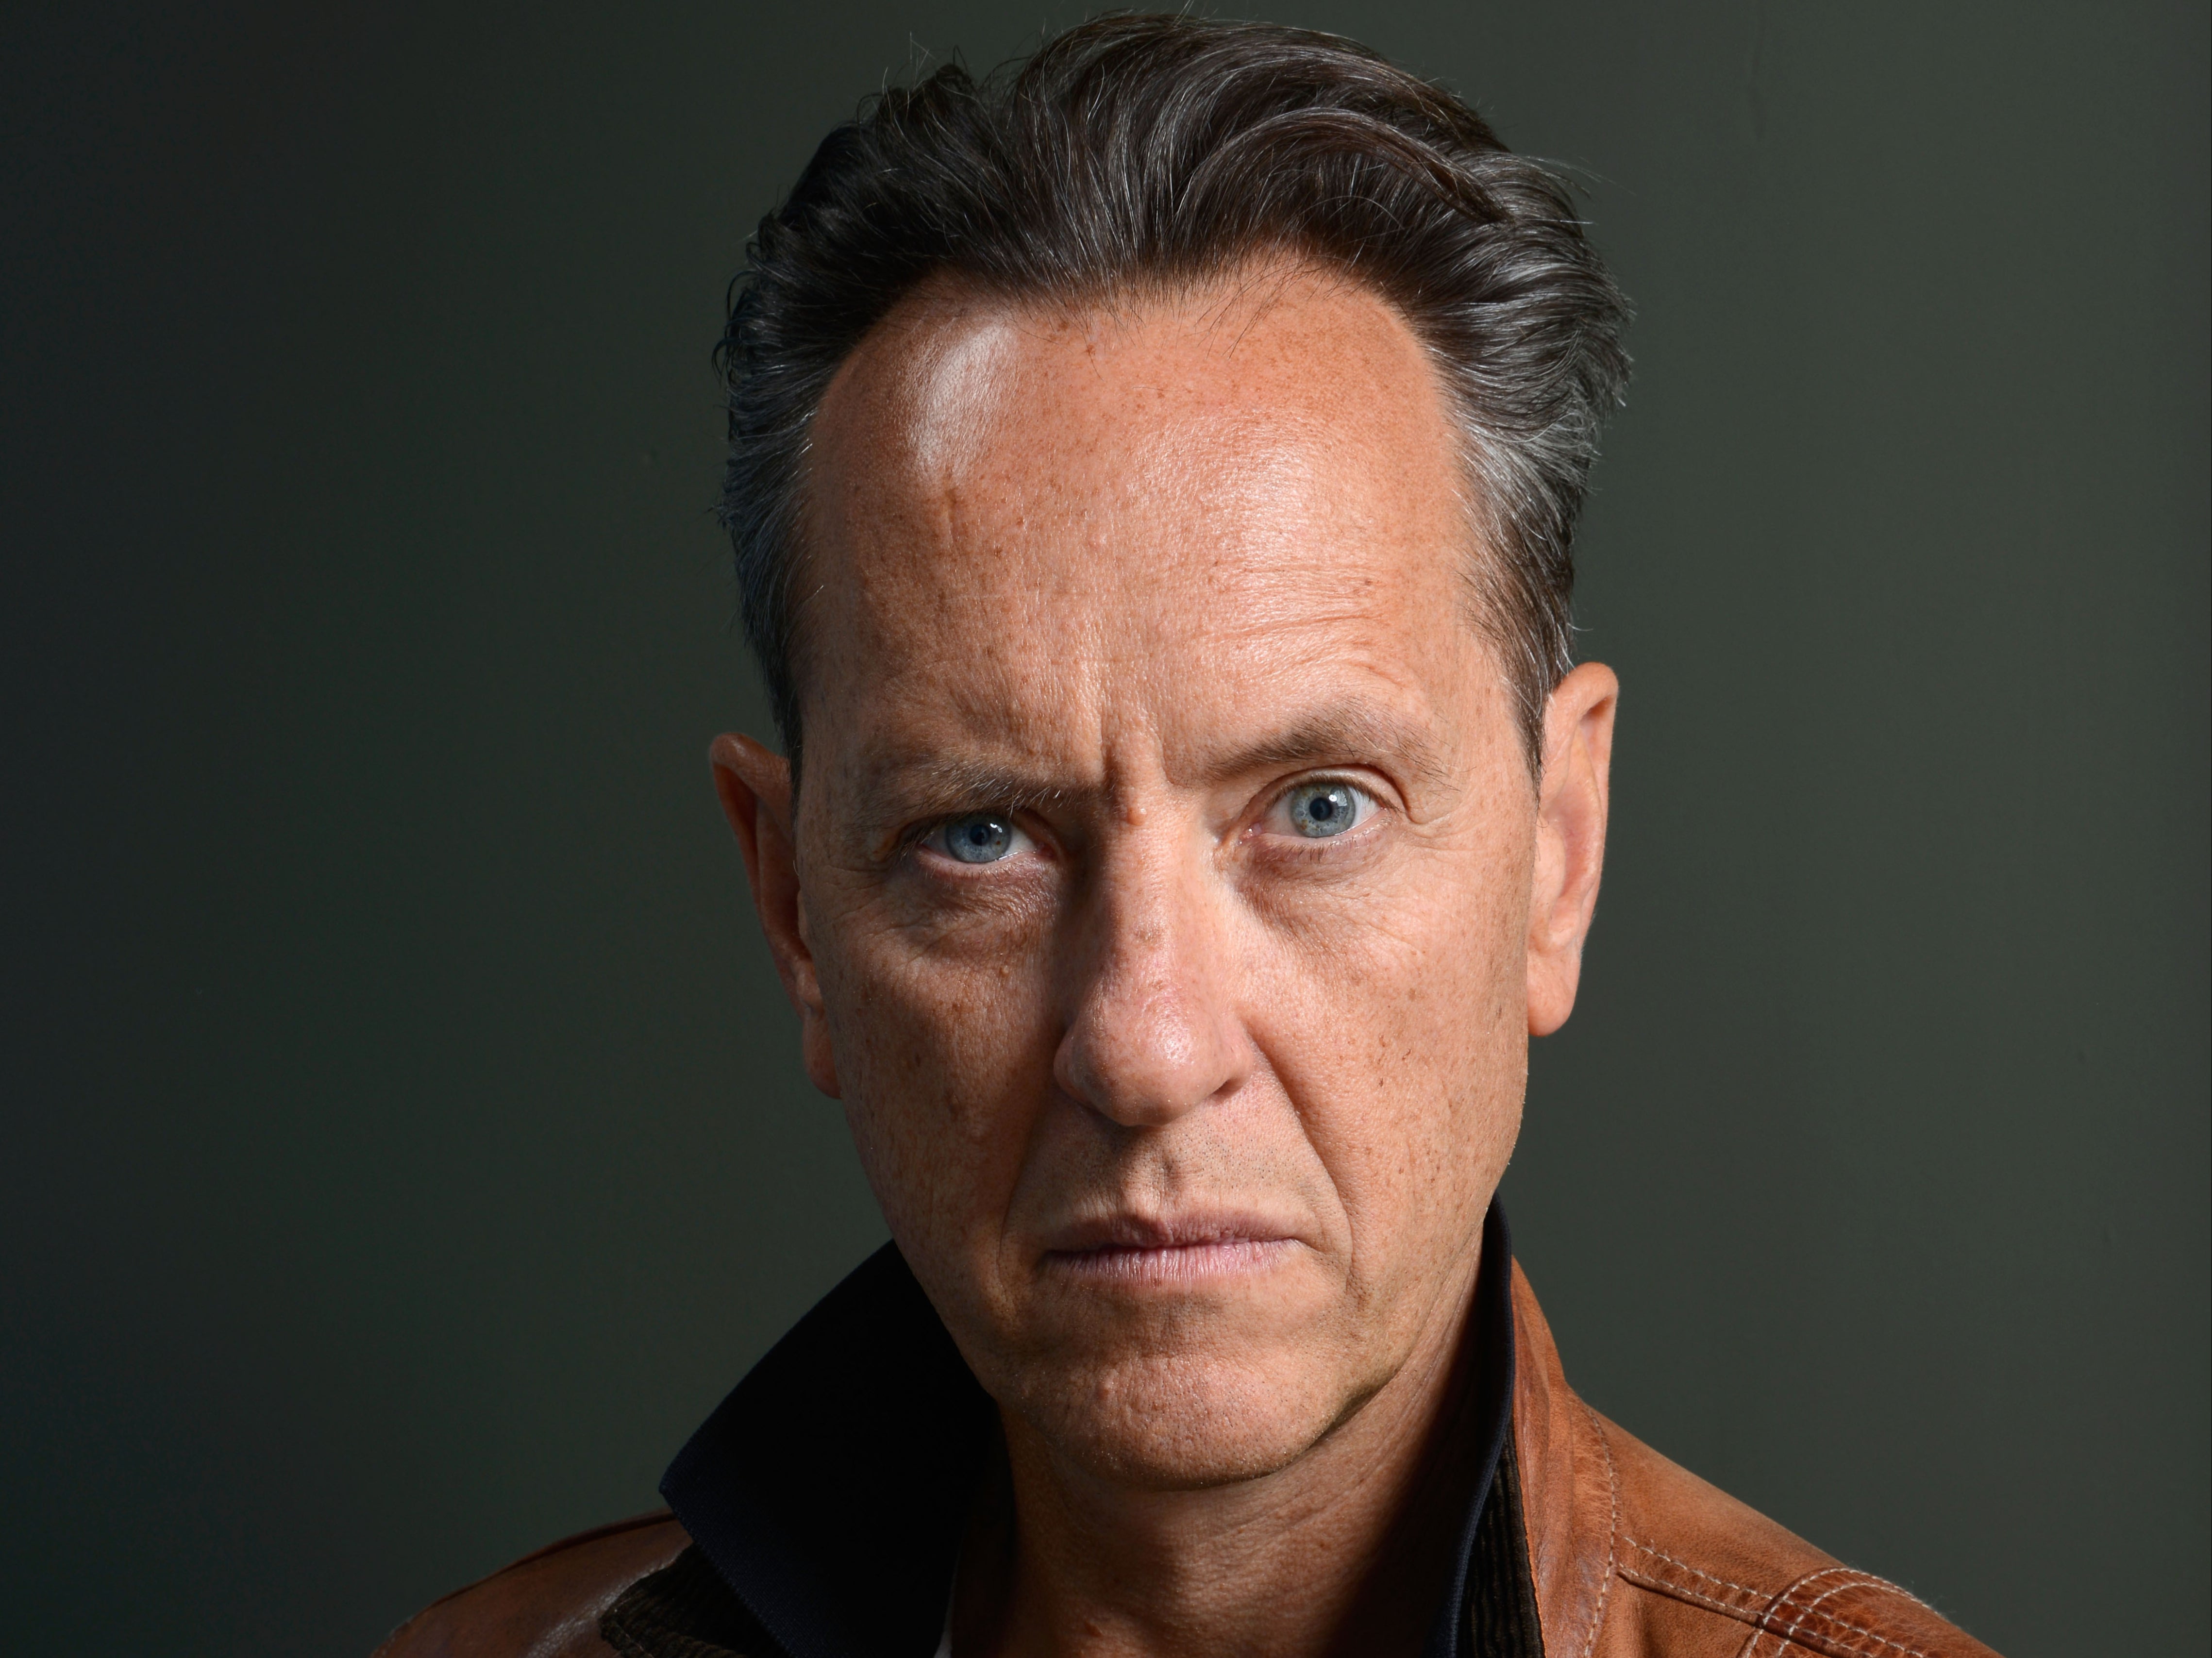 Richard E Grant on grief, music, and his late wife Joan Washington I still have silent conversations with her The Independent pic